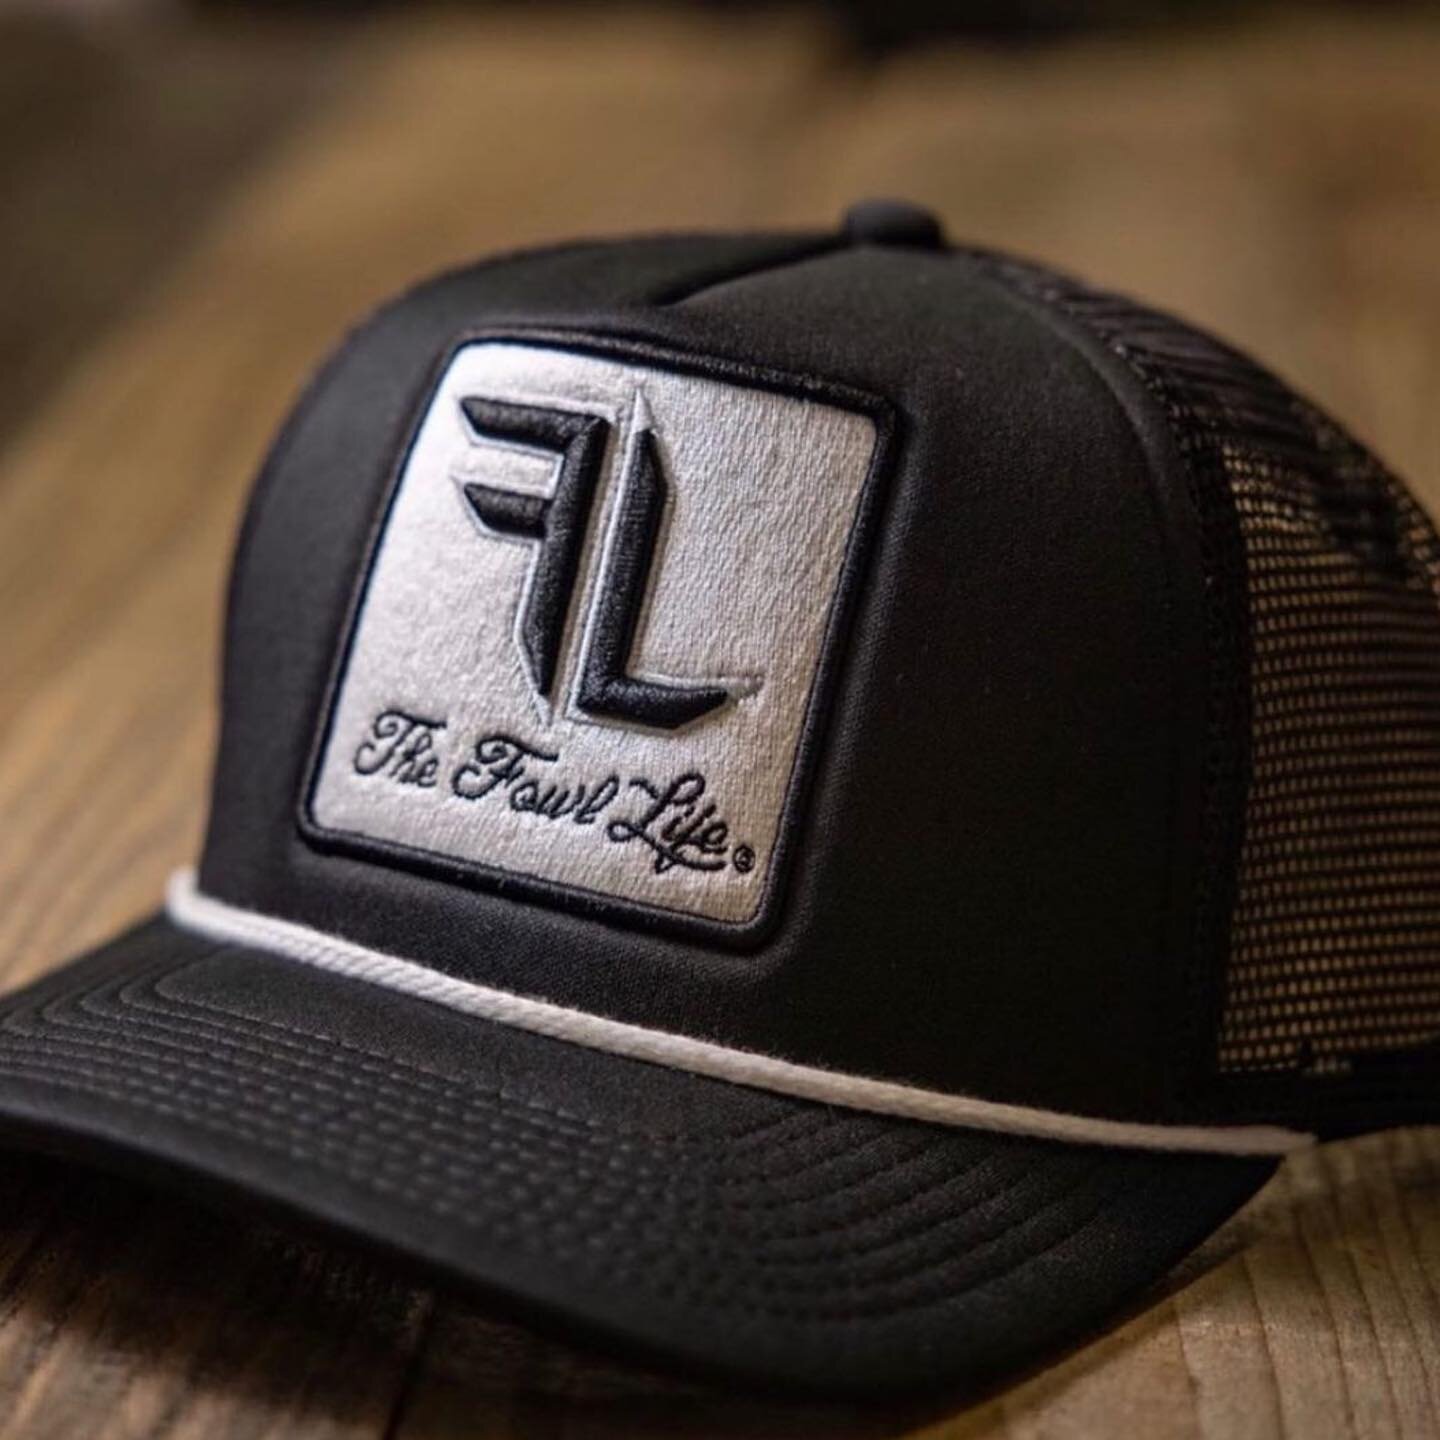 Step up your game and Do Better. 

#Repost @domehatsderek615
・・・
Some hats we did for the folks over at @thefowllifetv @theproviderlife and @thislifeaintforeverybody podcast recently. If you&rsquo;re an outdoors person, you&rsquo;ll want to check the